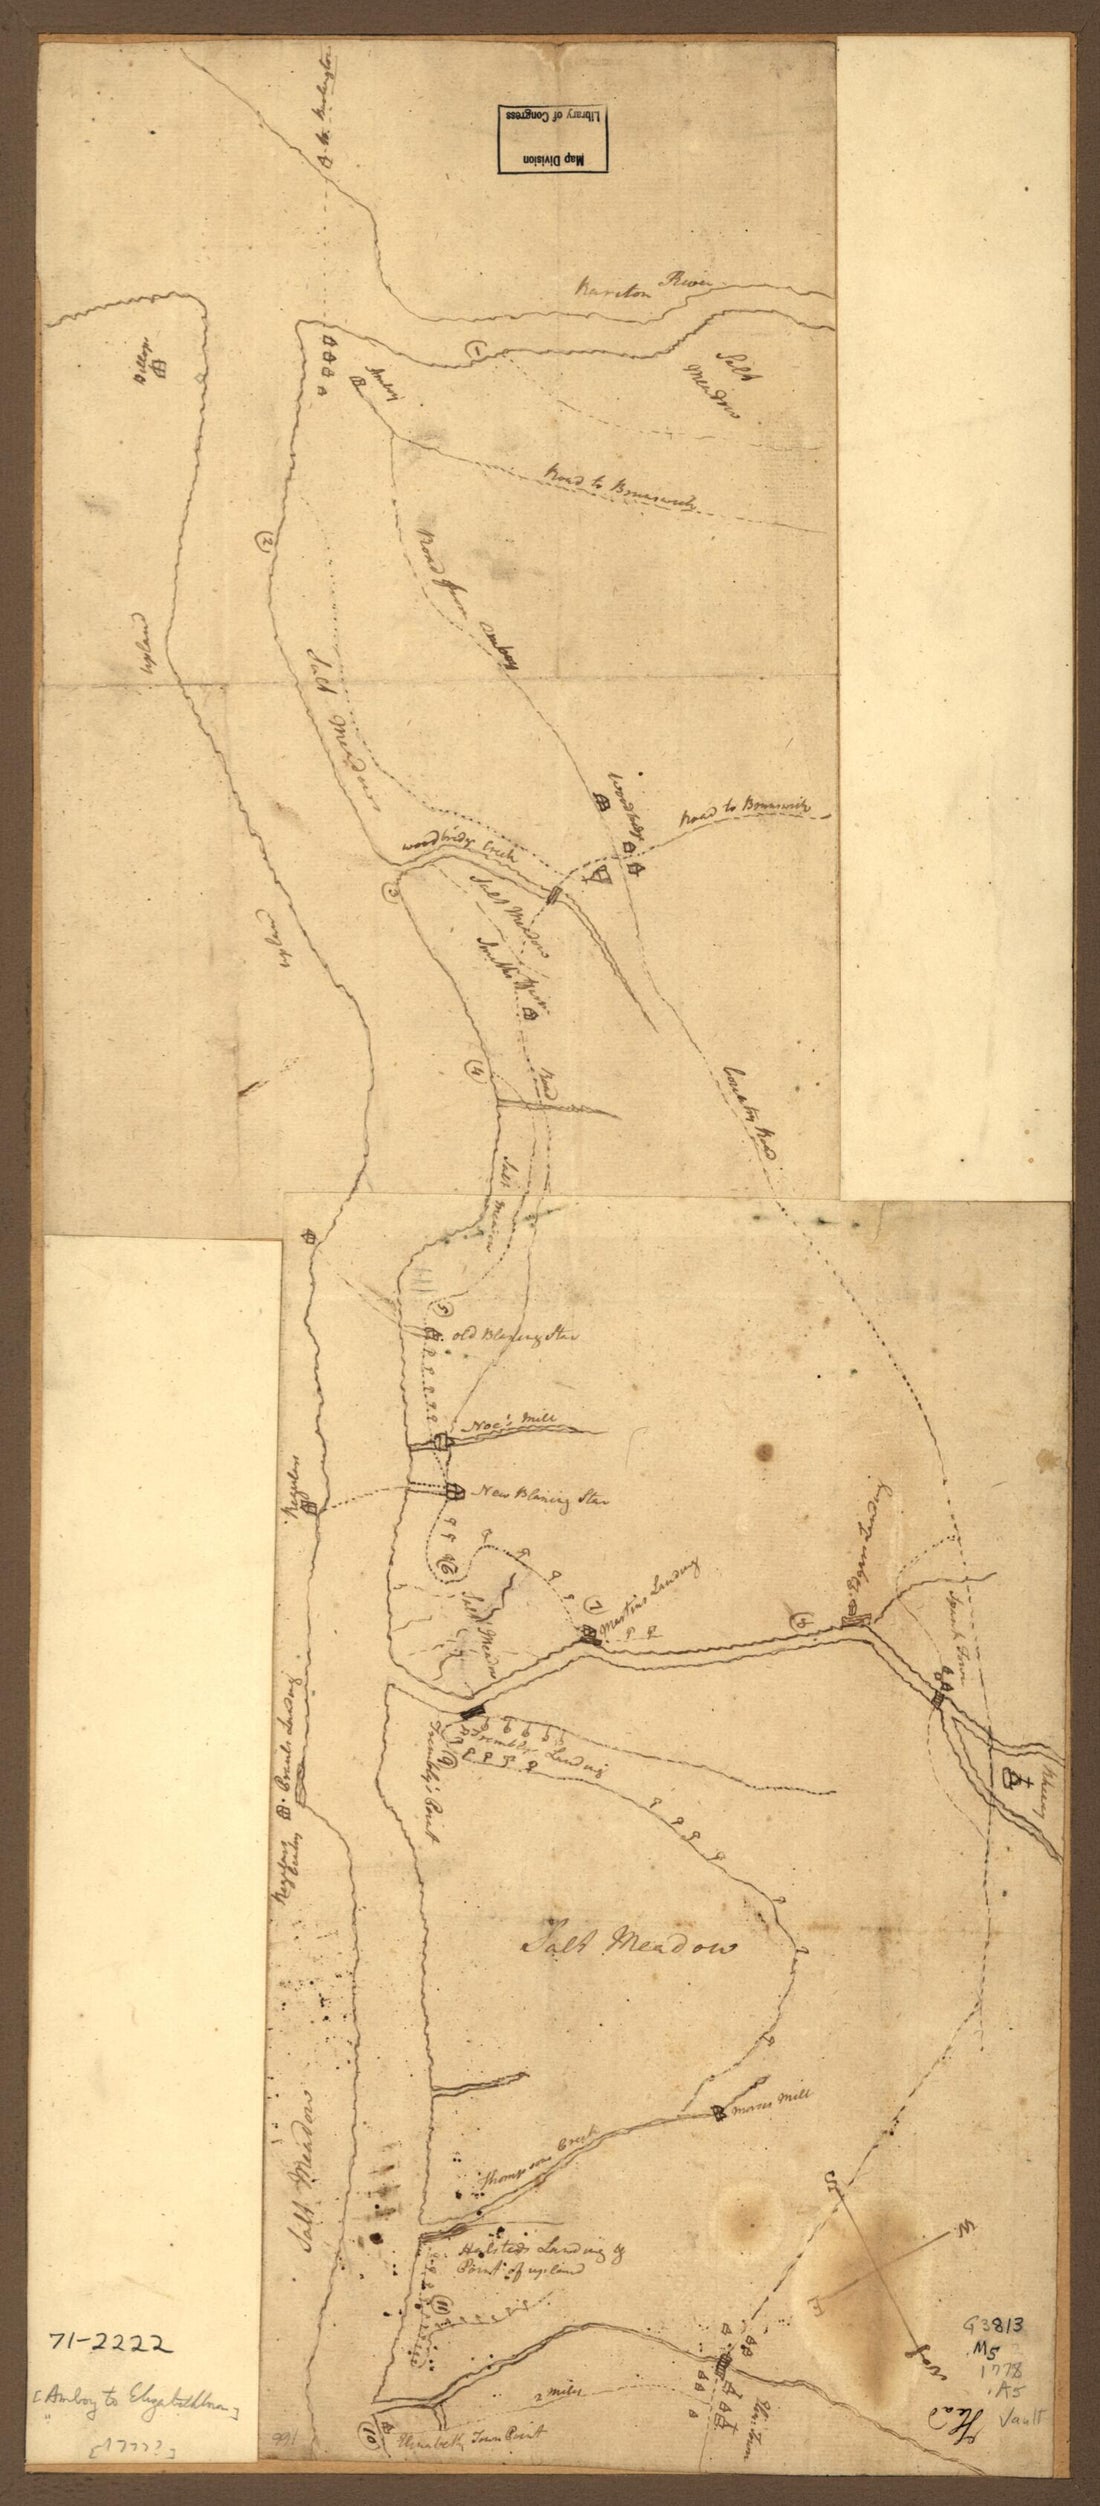 This old map of Amboy to Elizabethtown from 1778 was created by  in 1778